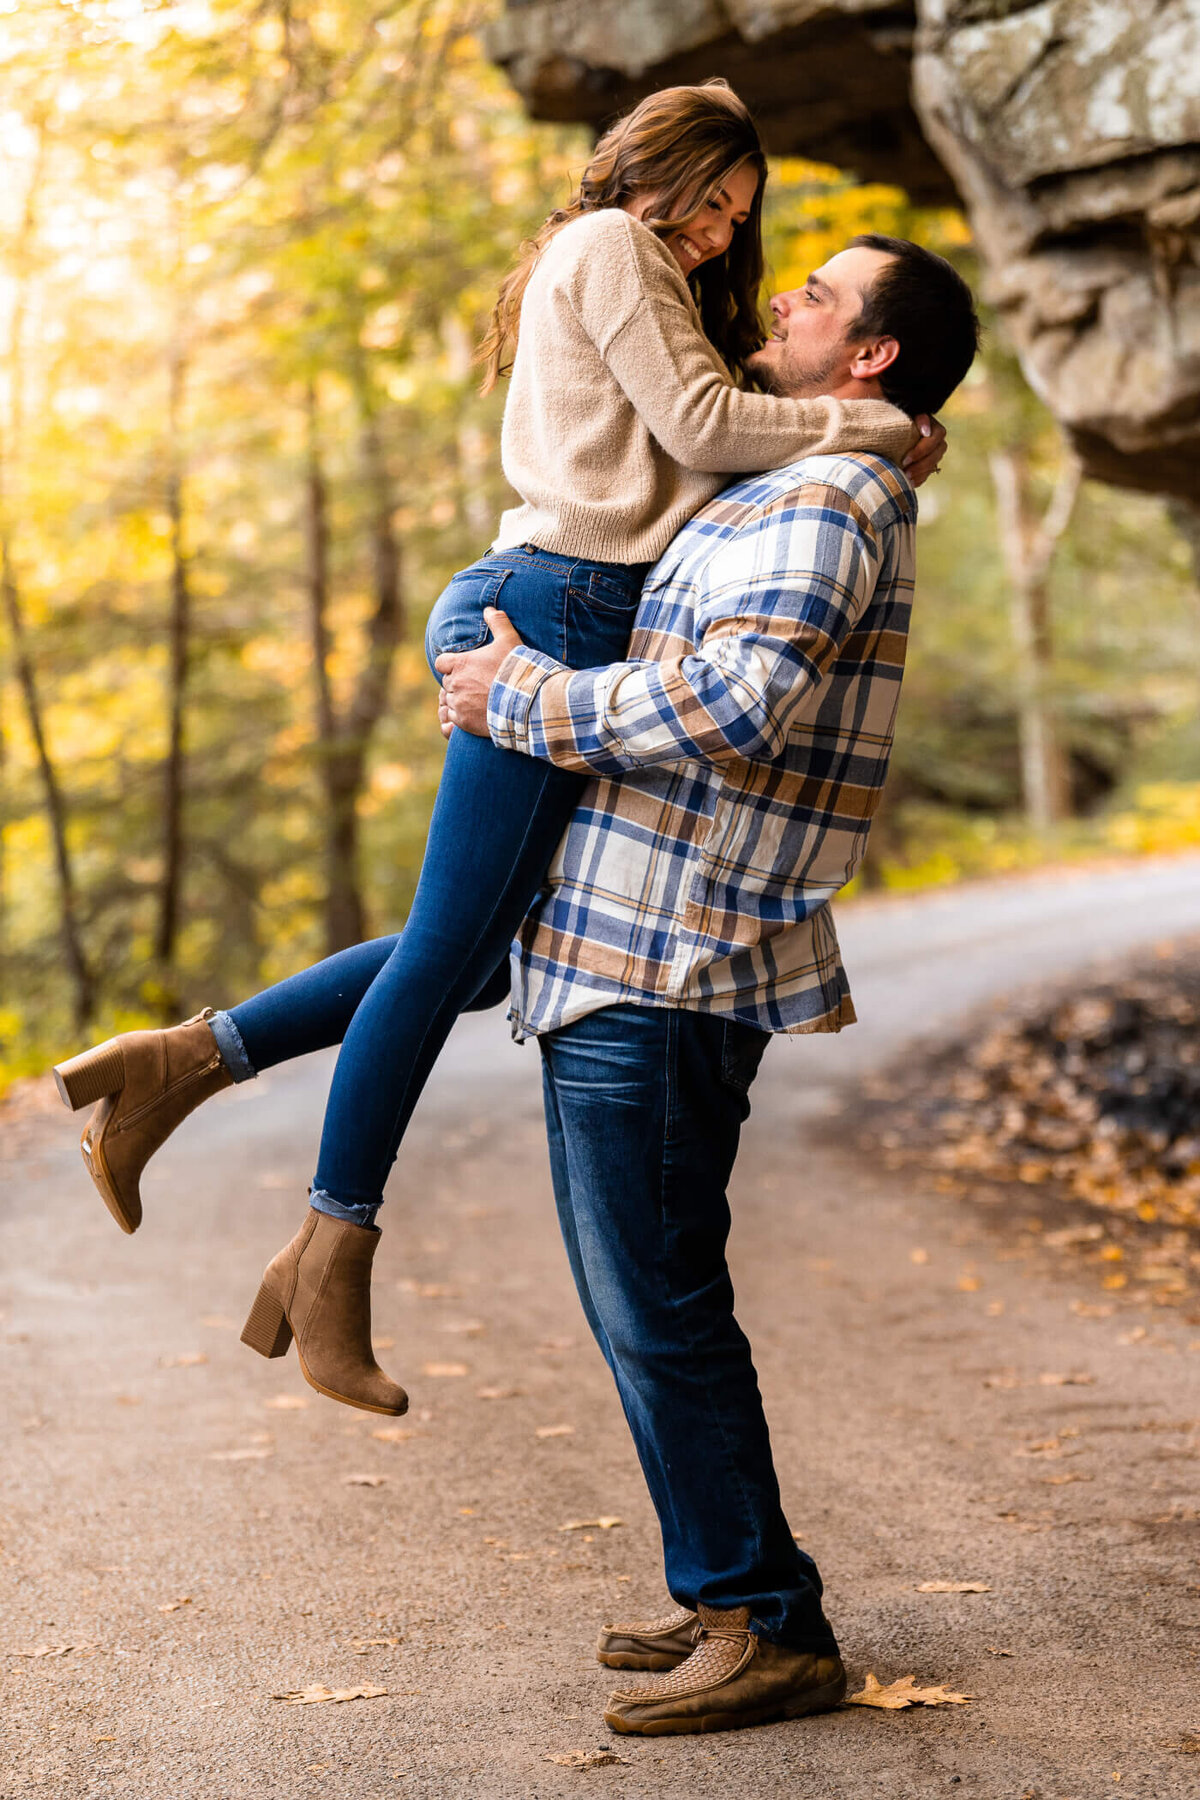 Man lifting his fiance while they smile together on a gravel road in McConnell's Mill State Park. Captured near sunset near portersville, PA by Pittsburgh engagement photographer Michael Fricke Photography